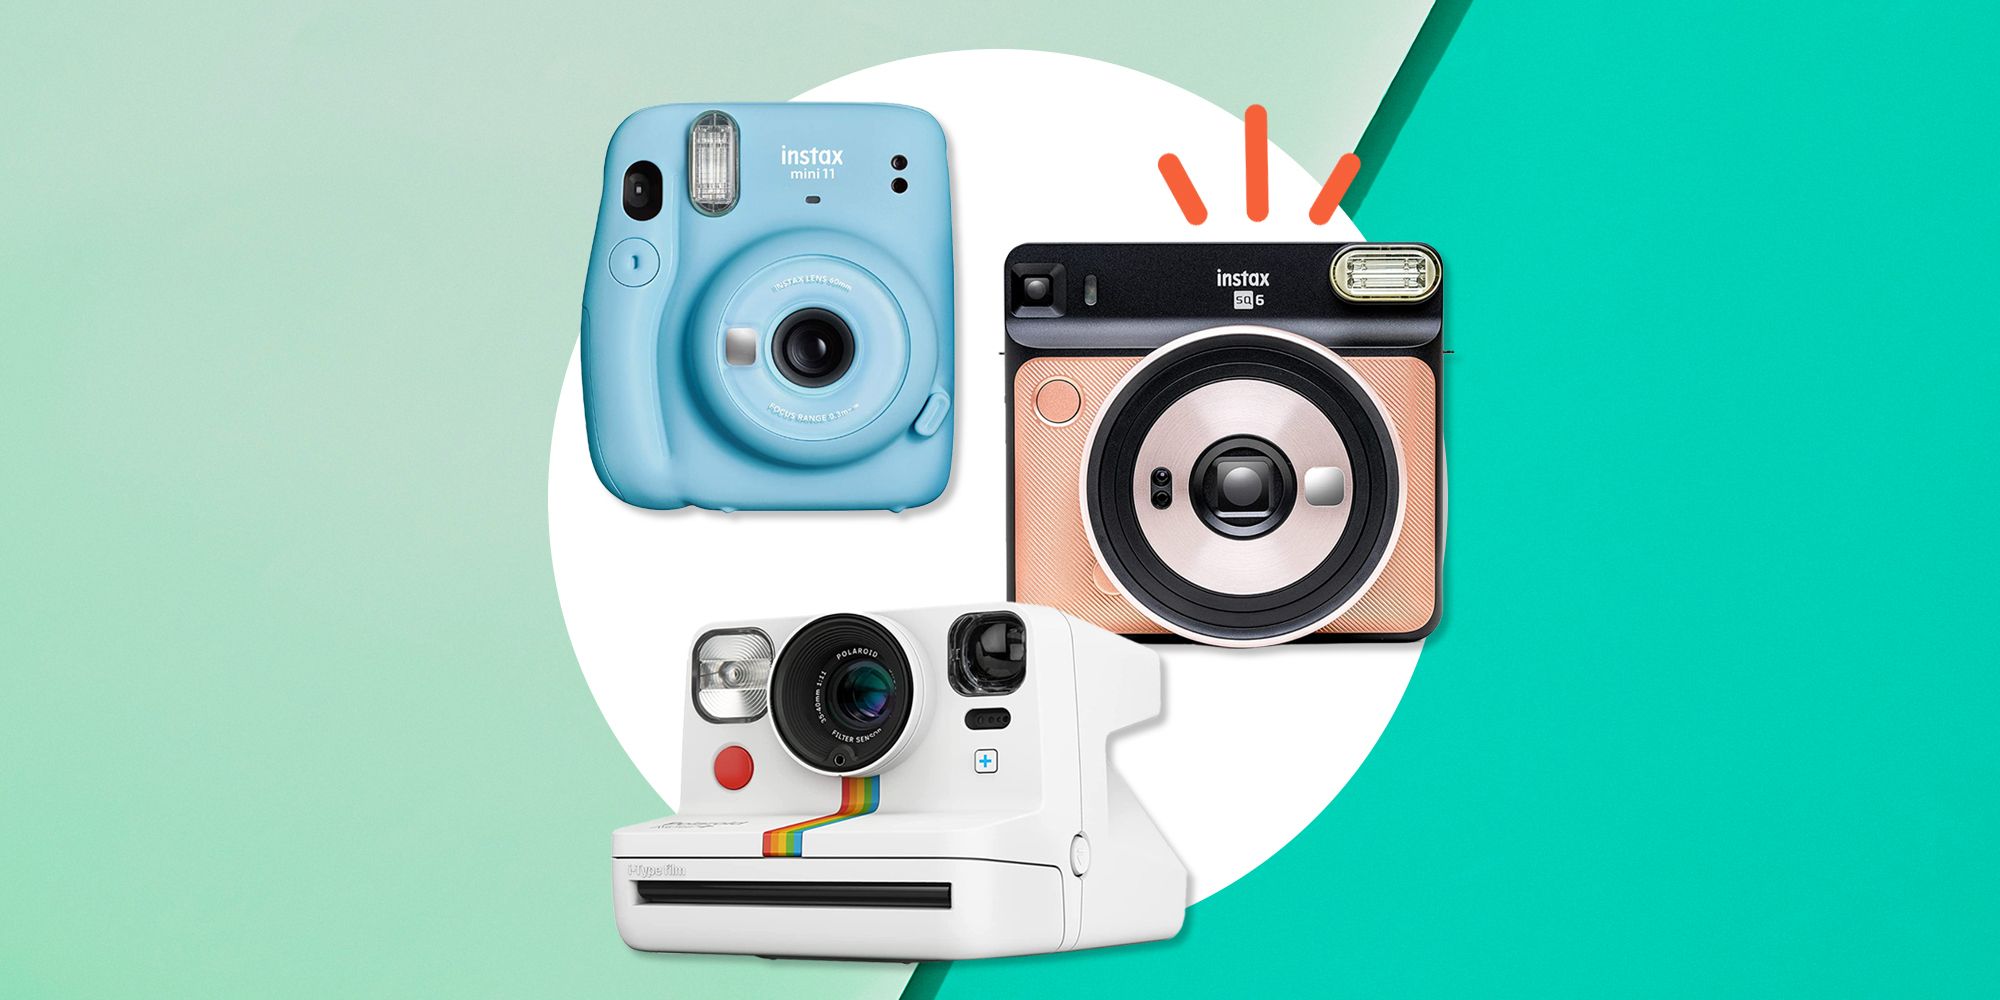 Best Instant Cameras To Buy In 2022, According To Reviews